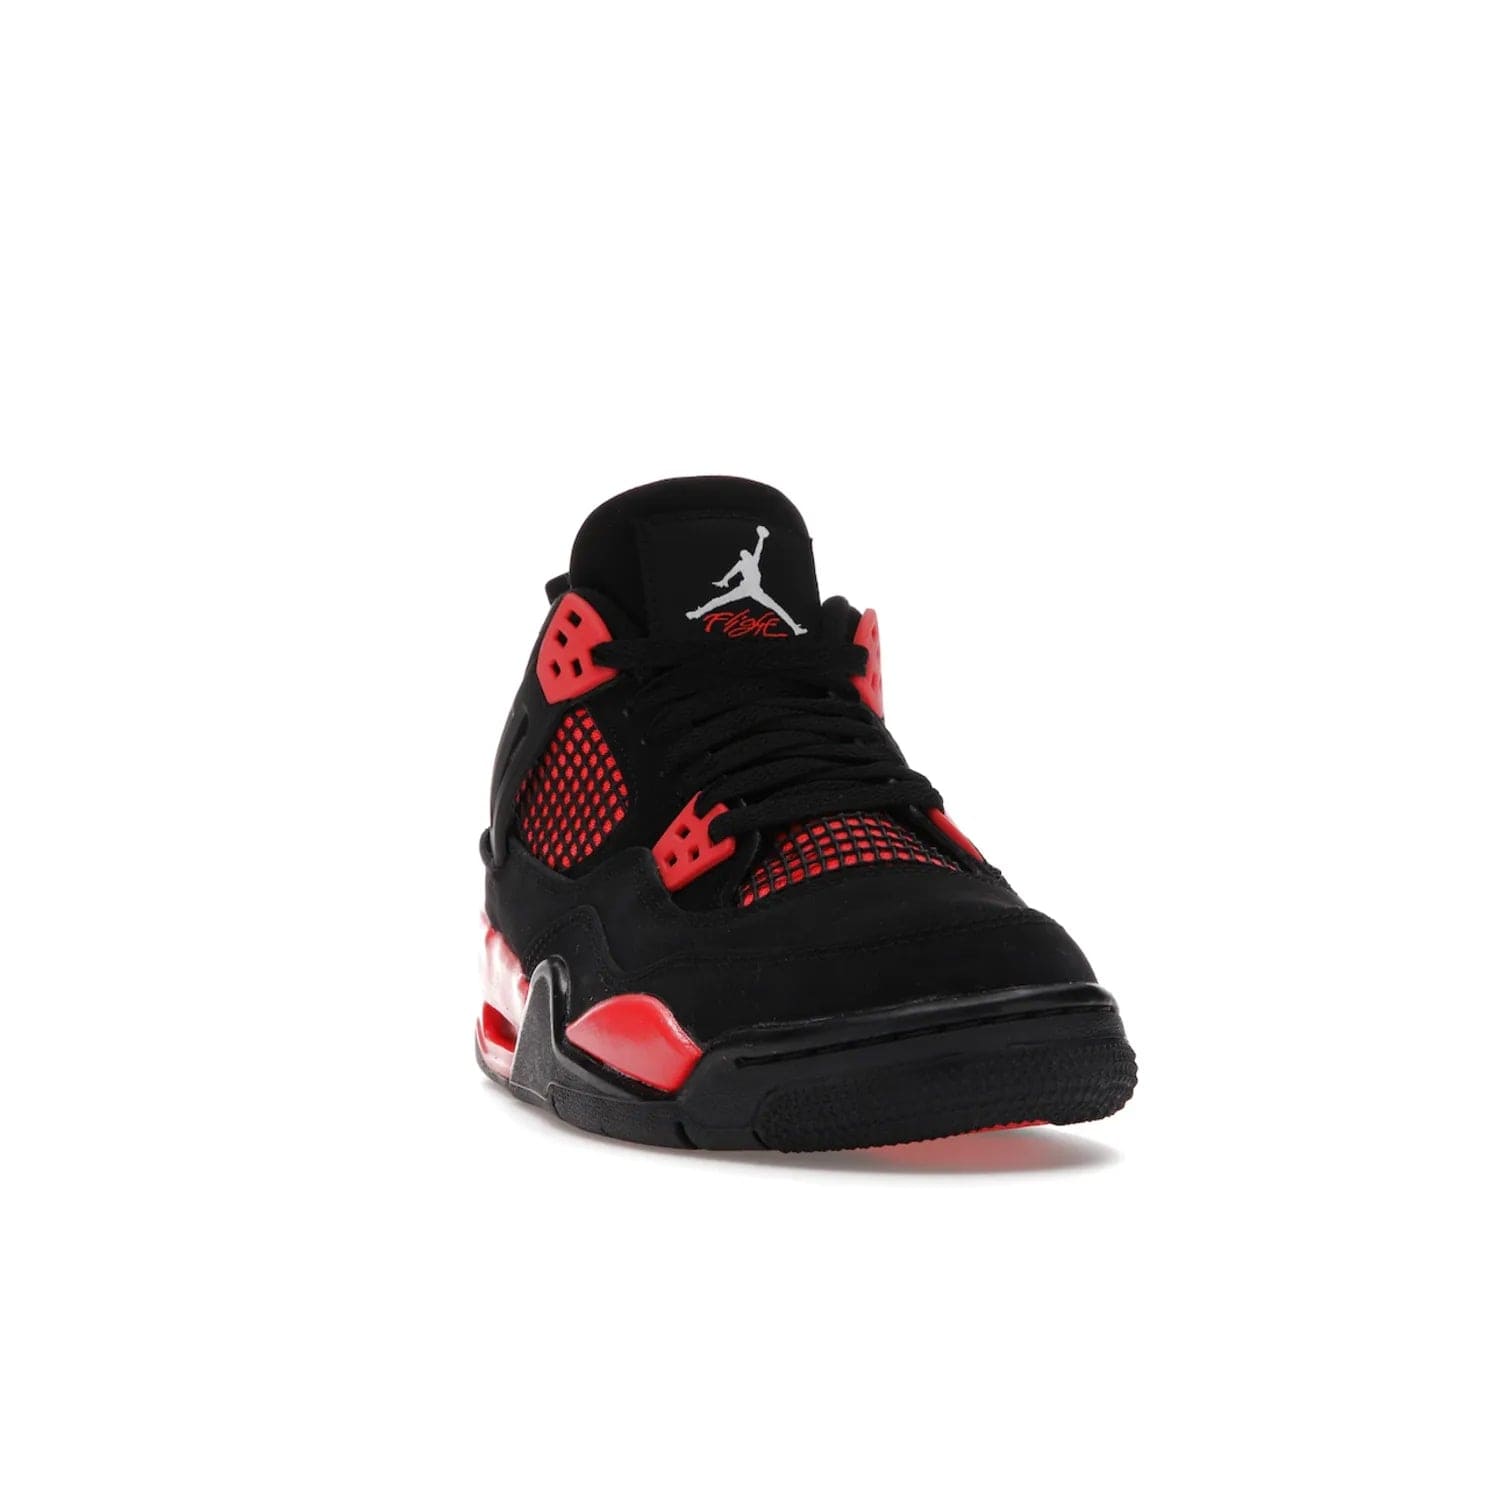 Jordan 4 Retro Red Thunder (GS) - Image 8 - Only at www.BallersClubKickz.com - The Air Jordan 4 Retro Red Thunder GS features a stylish black and crimson upper with a Jumpman logo. Athletic midsole with Air bubbles for cushioning and black rubber outsole with iconic motif complete this classic sneaker.